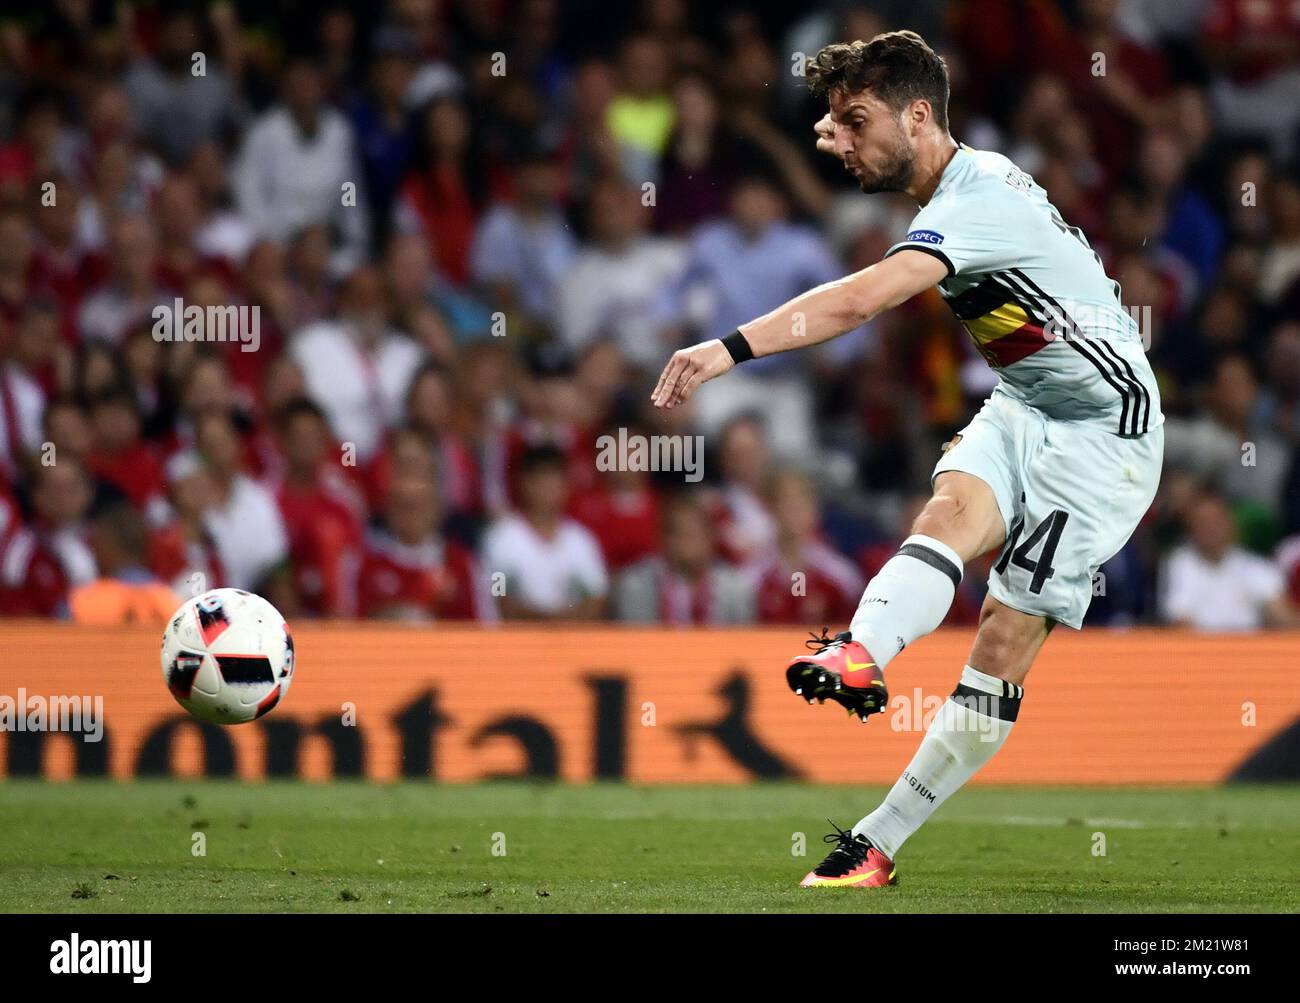 Belgium's Dries Mertens kicks the ball during a soccer game between Belgian national soccer team Red Devils and Hungary, in the round of 16 of the UEFA Euro 2016 European Championships, on Sunday 26 June 2016, in Toulouse, France. The Euro2016 tournament is taking place from 10 June to 10 July. BELGA PHOTO DIRK WAEM Stock Photo